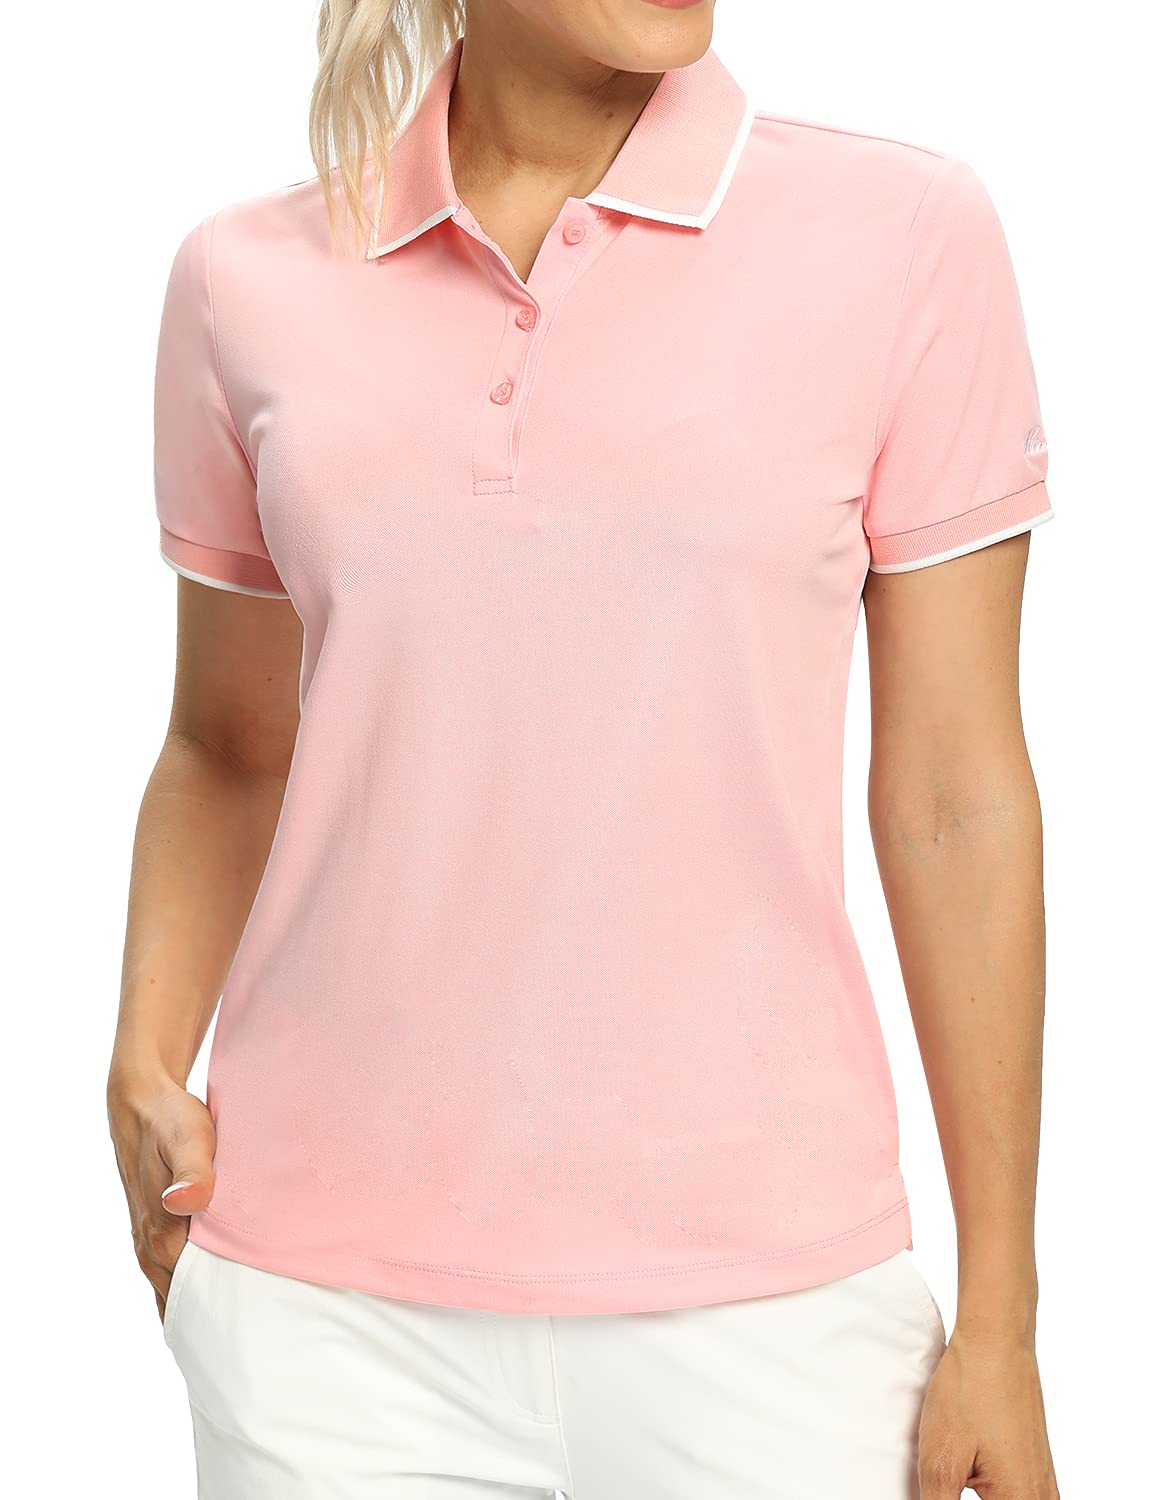 Hiverlay Women Golf Shirts Polo Shirts for Women UPF 50+ Lightweight  Quick-Dry Collared Tennis Daily Shirts Work Tops Contrast Color Edge  X-Large Pink-contrast Color Edge